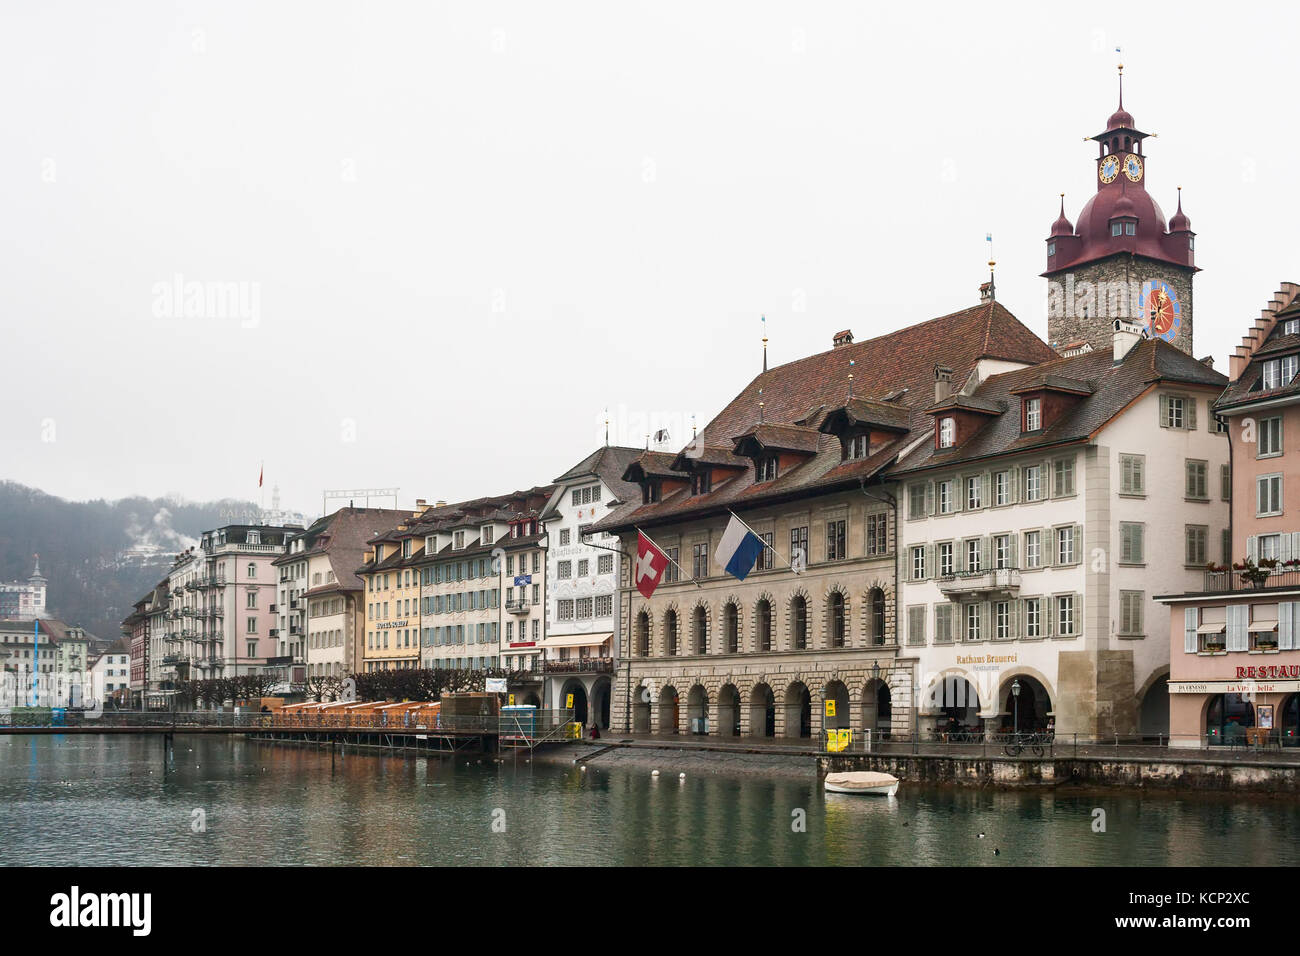 LUCERNE, SWITZERLAND - FEBRUARY 04, 2010: Lucerne in winter. Fog, rain and bad weather. View of the Rathausquai and the Clock Tower Stock Photo